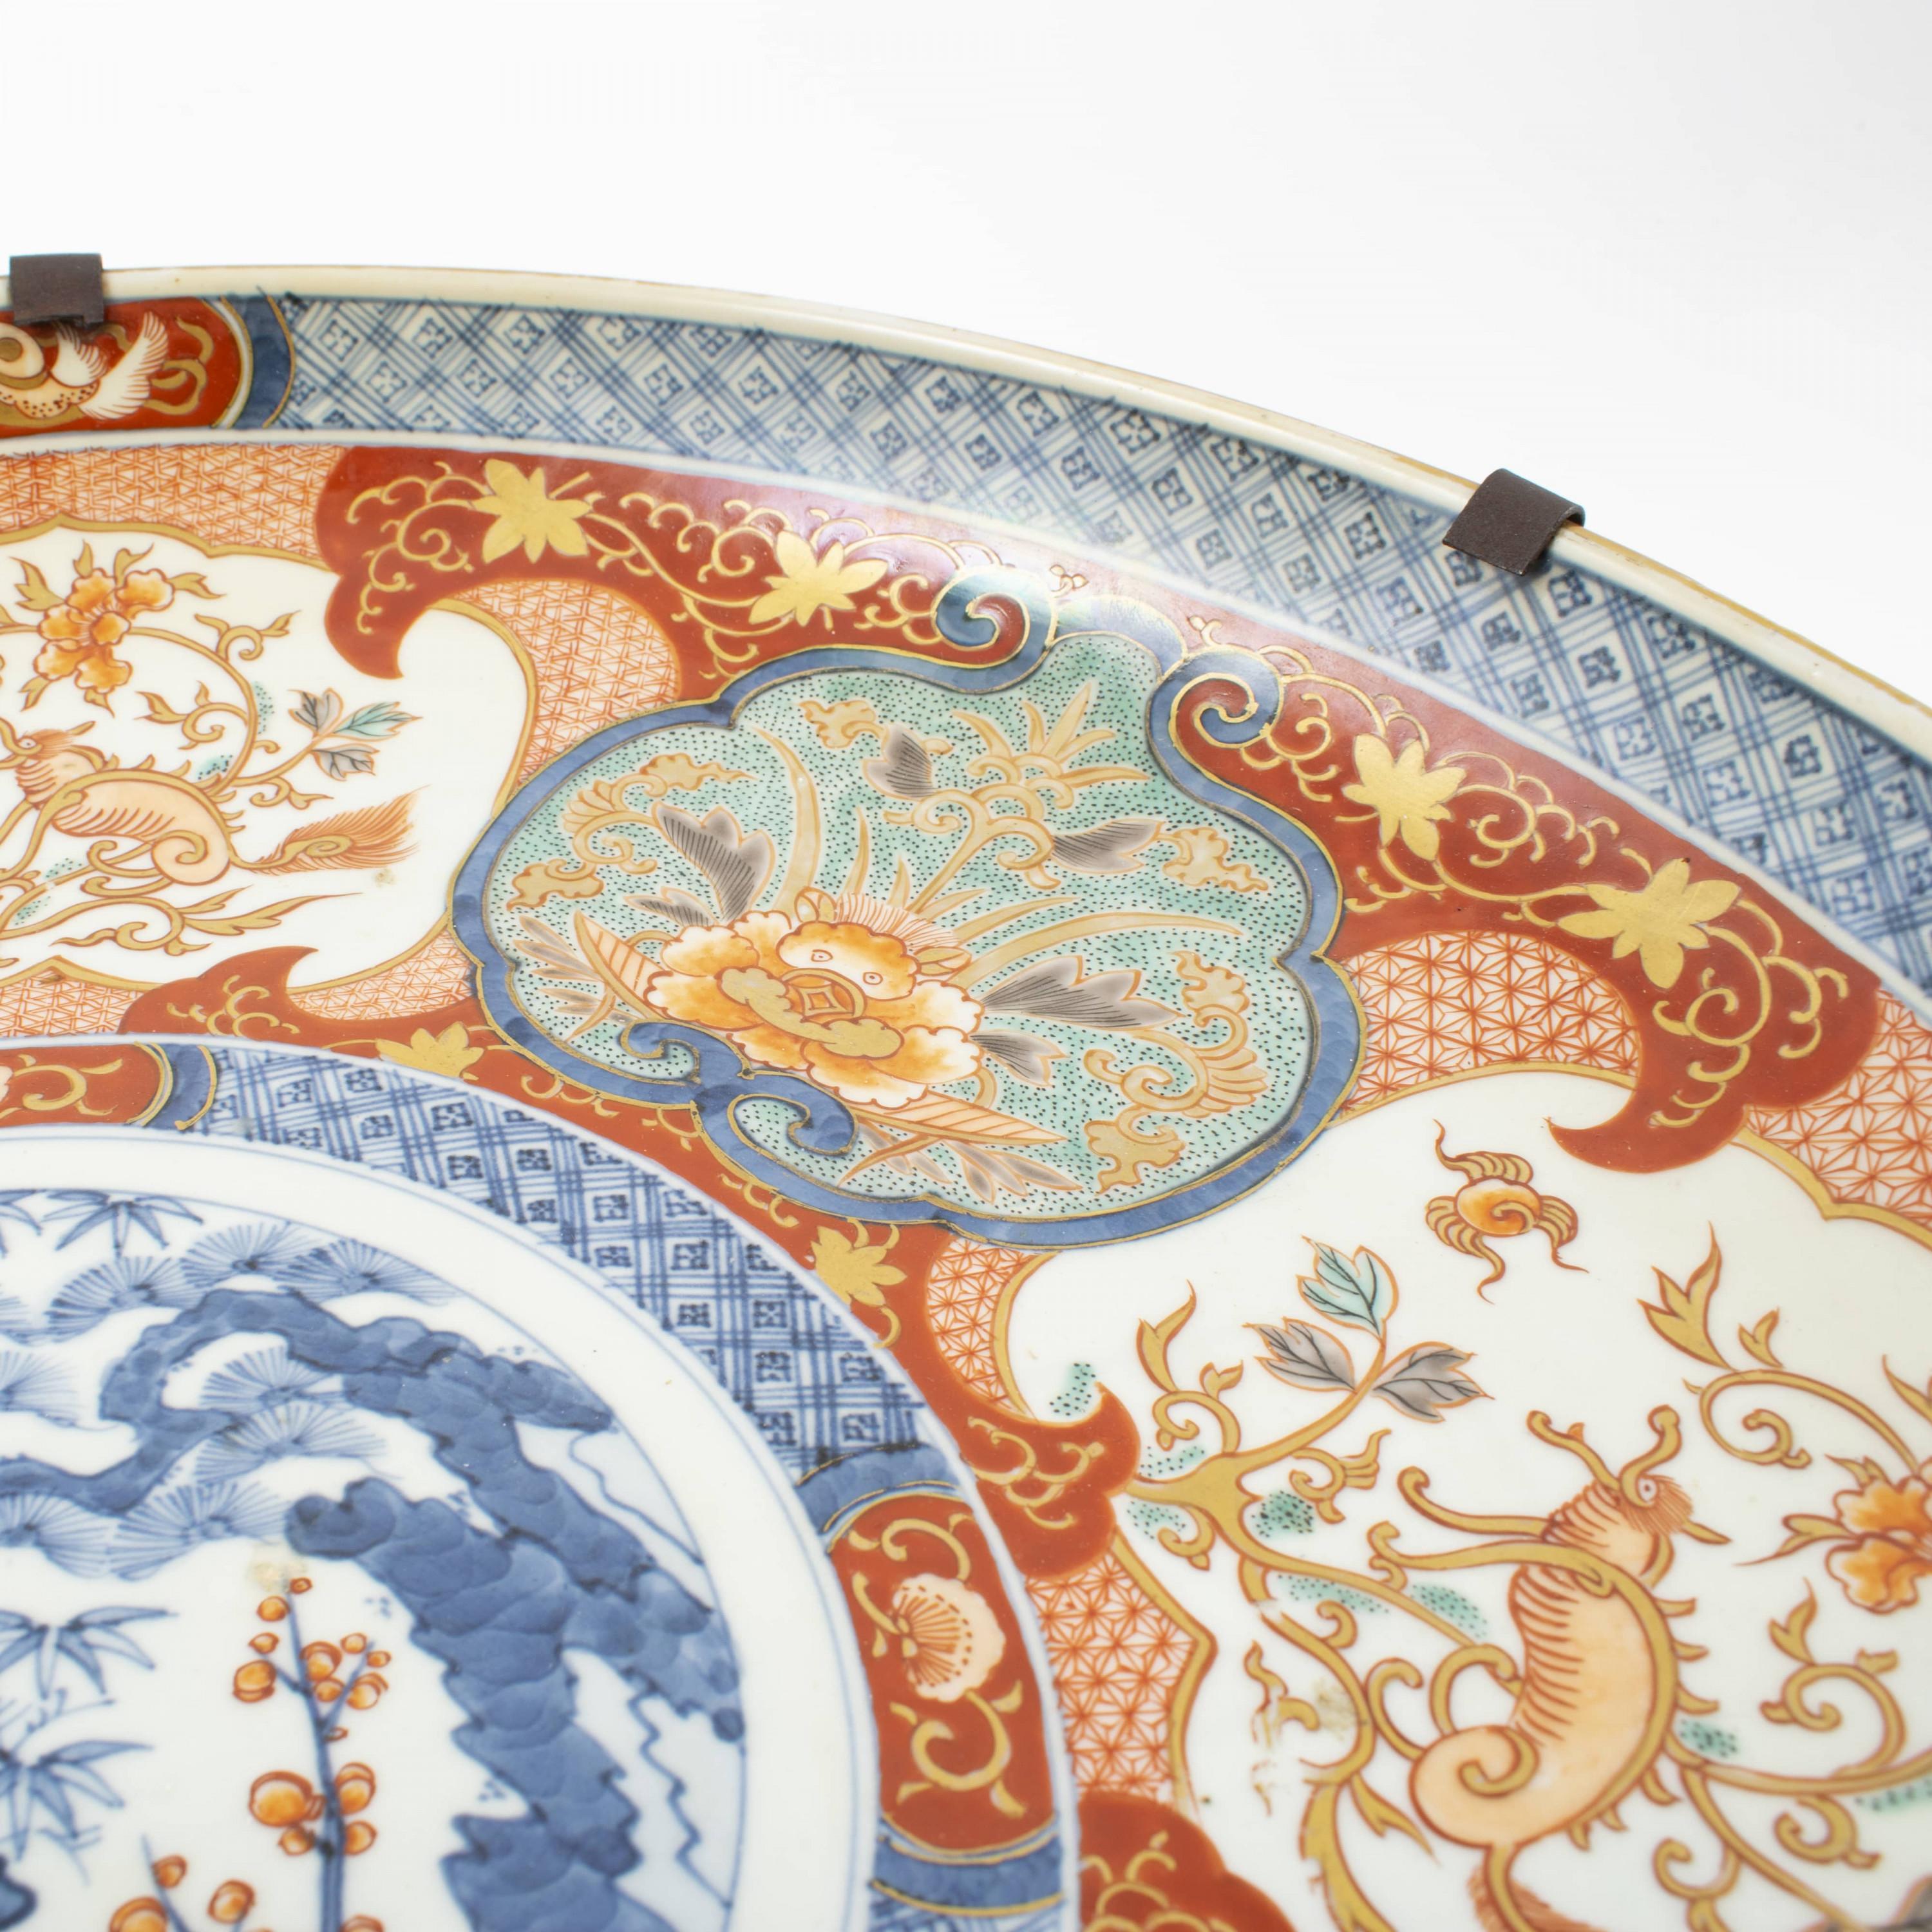 Large Japanese Imari Porcelain Charger from the Meiji Period 1